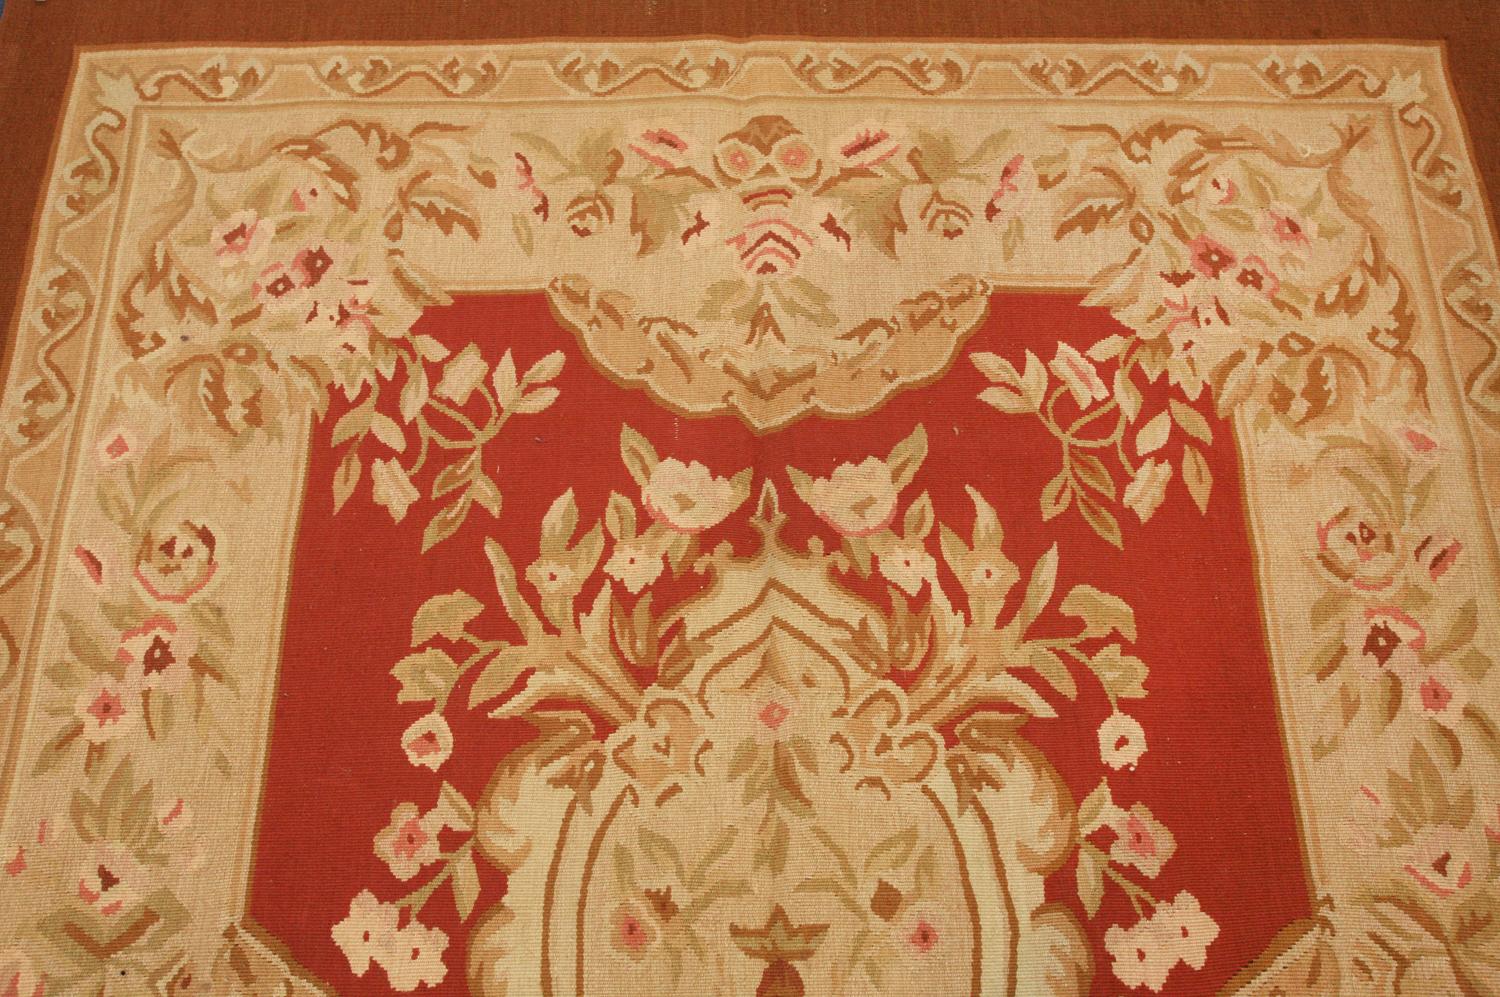 Contemporary Aubusson French Style Chinese Flat-weave Rug, 21st Century